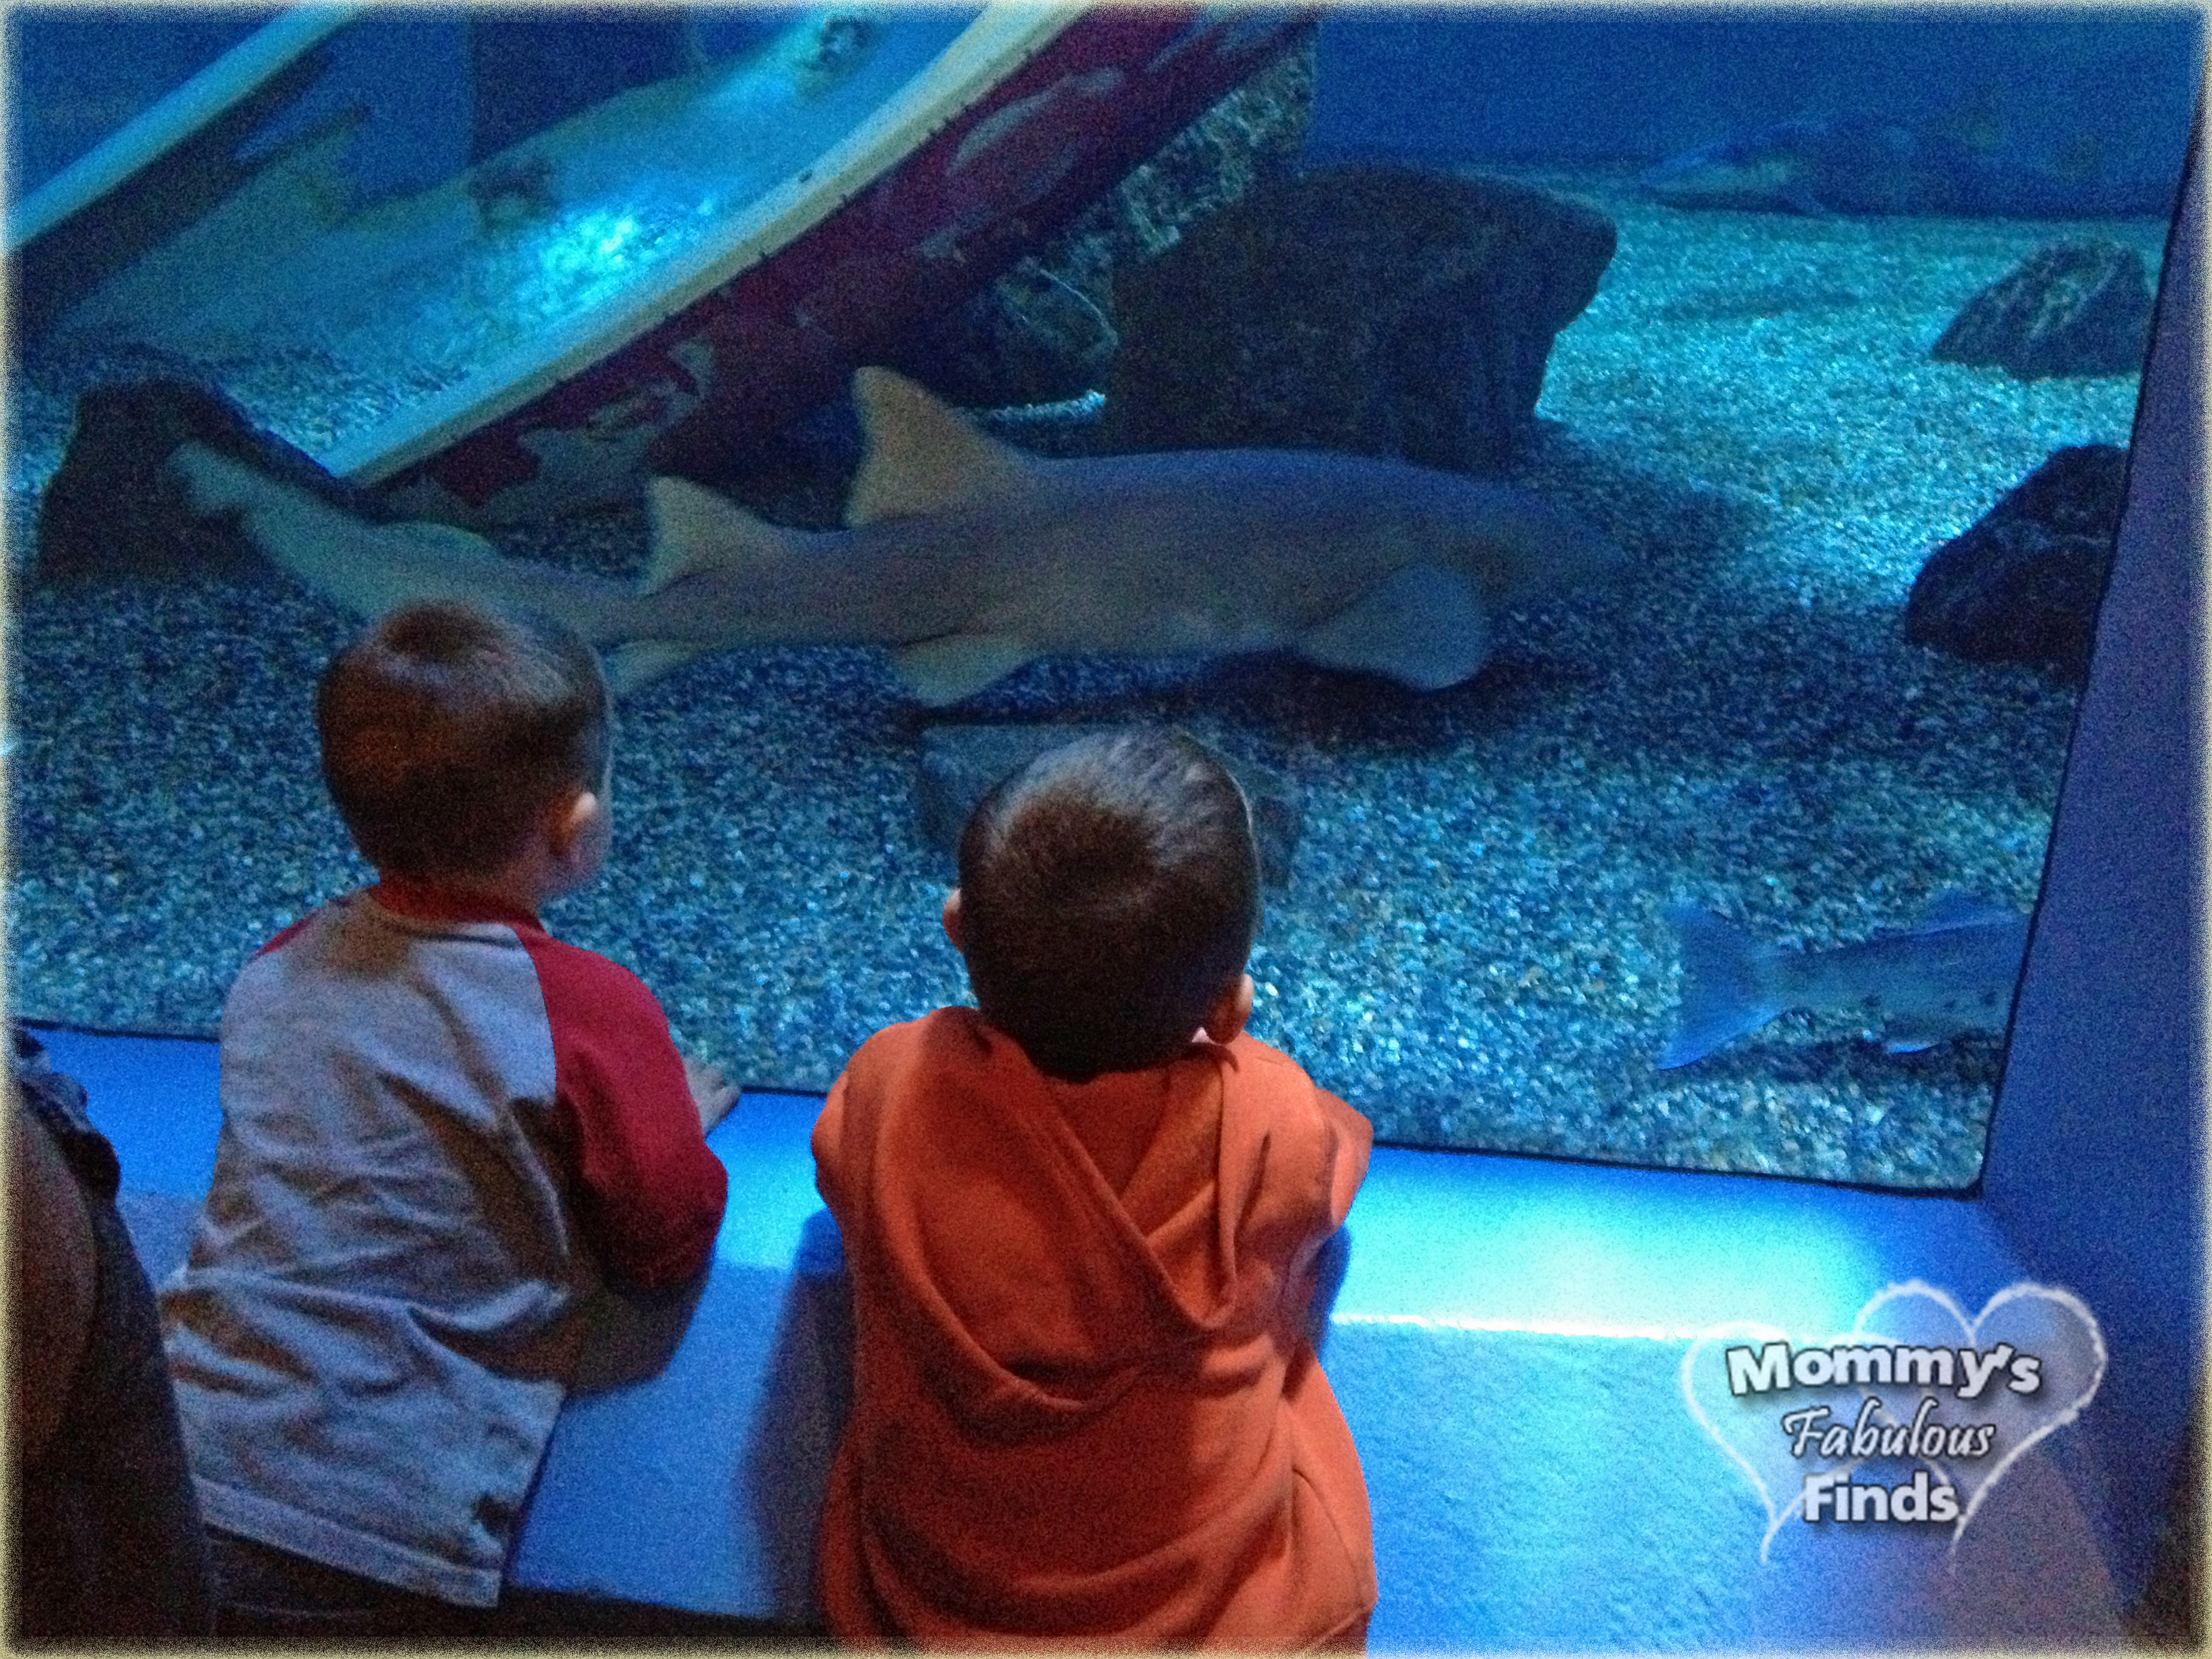 Mother\u002639;s Day Weekend at the Mystic Aquarium  Mommy\u002639;s Fabulous Finds